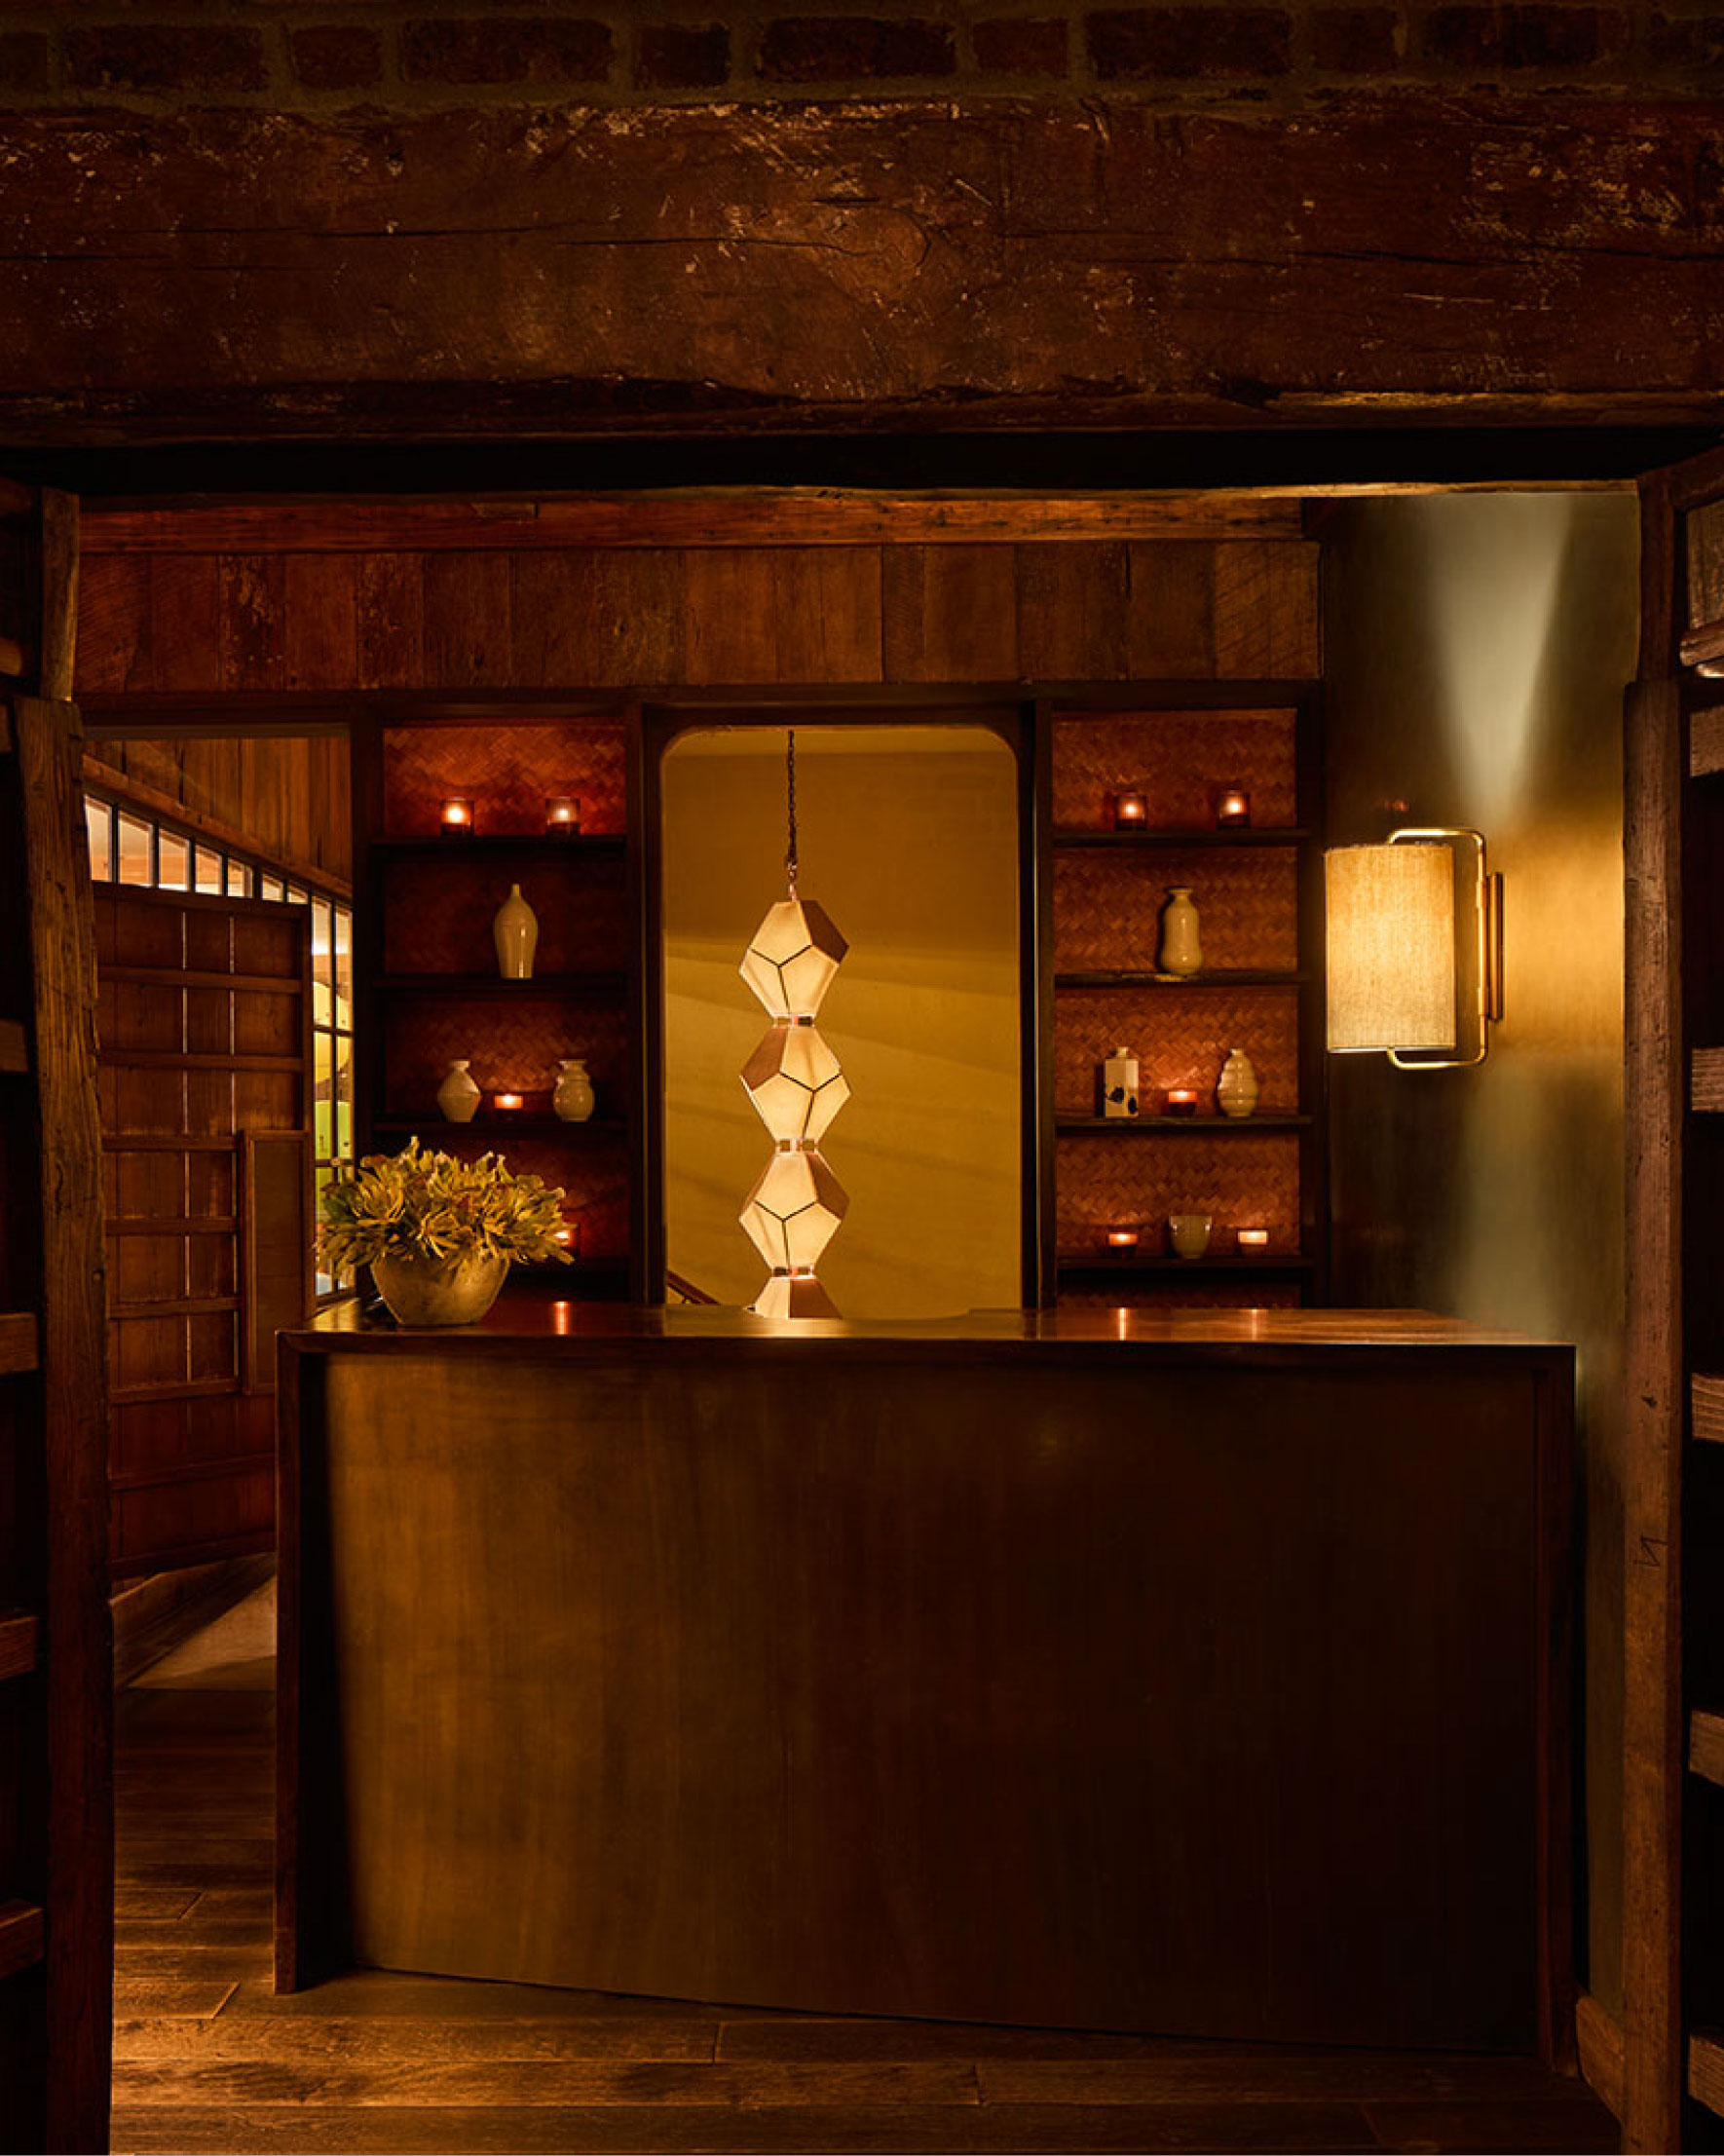 Looking through a doorway at the front desk inside the Shibui Spa